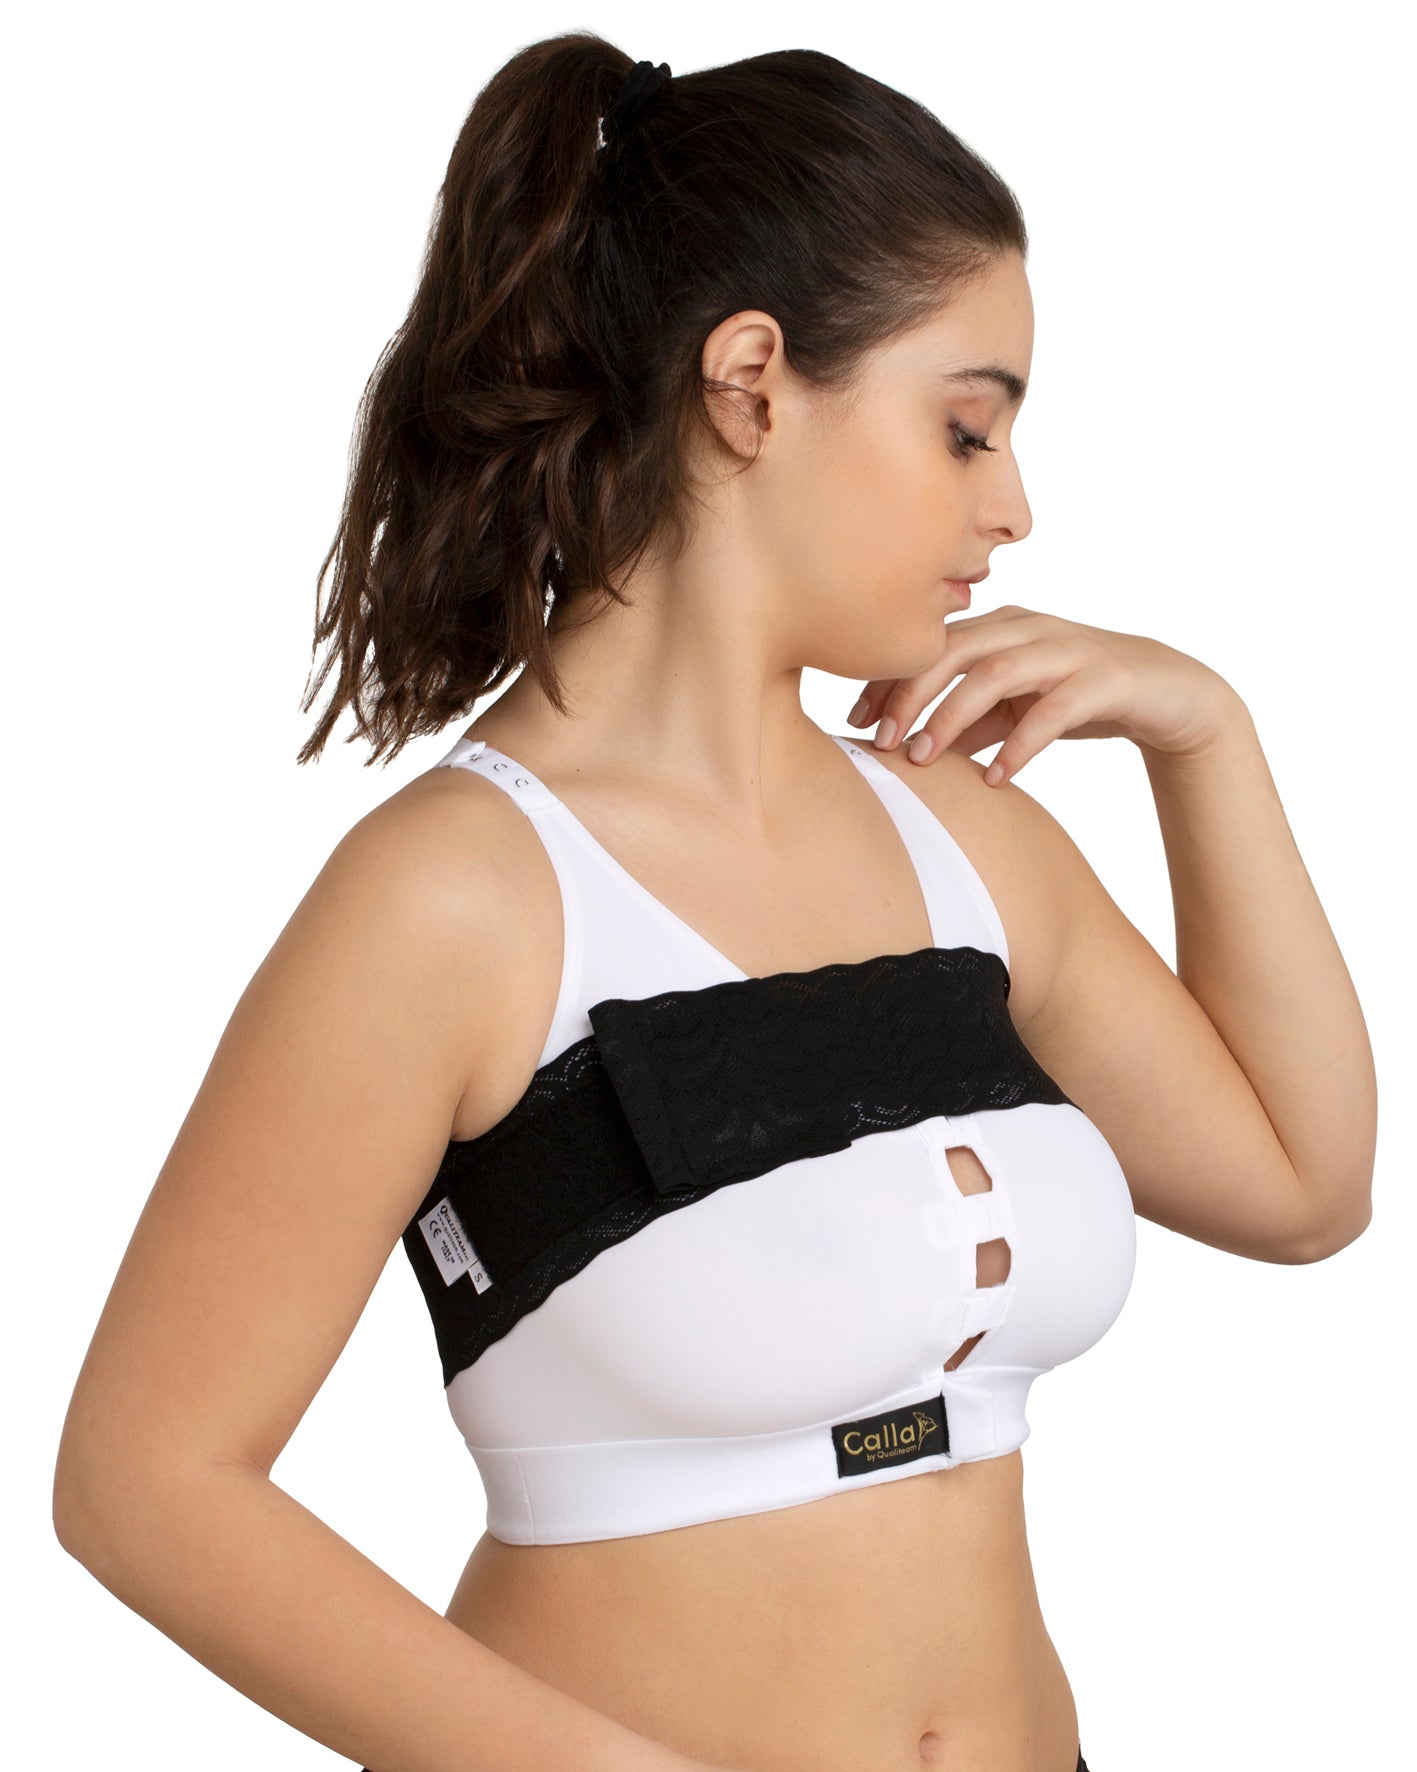 Buy Breast Implant Stabilizer Band, Post Surgery Augmentation and Reduction  Strap, Medical Chest Support Belt, Compression Bandage for  Womenï¼Ë†Blackï¼â€° Online at Low Prices in India 